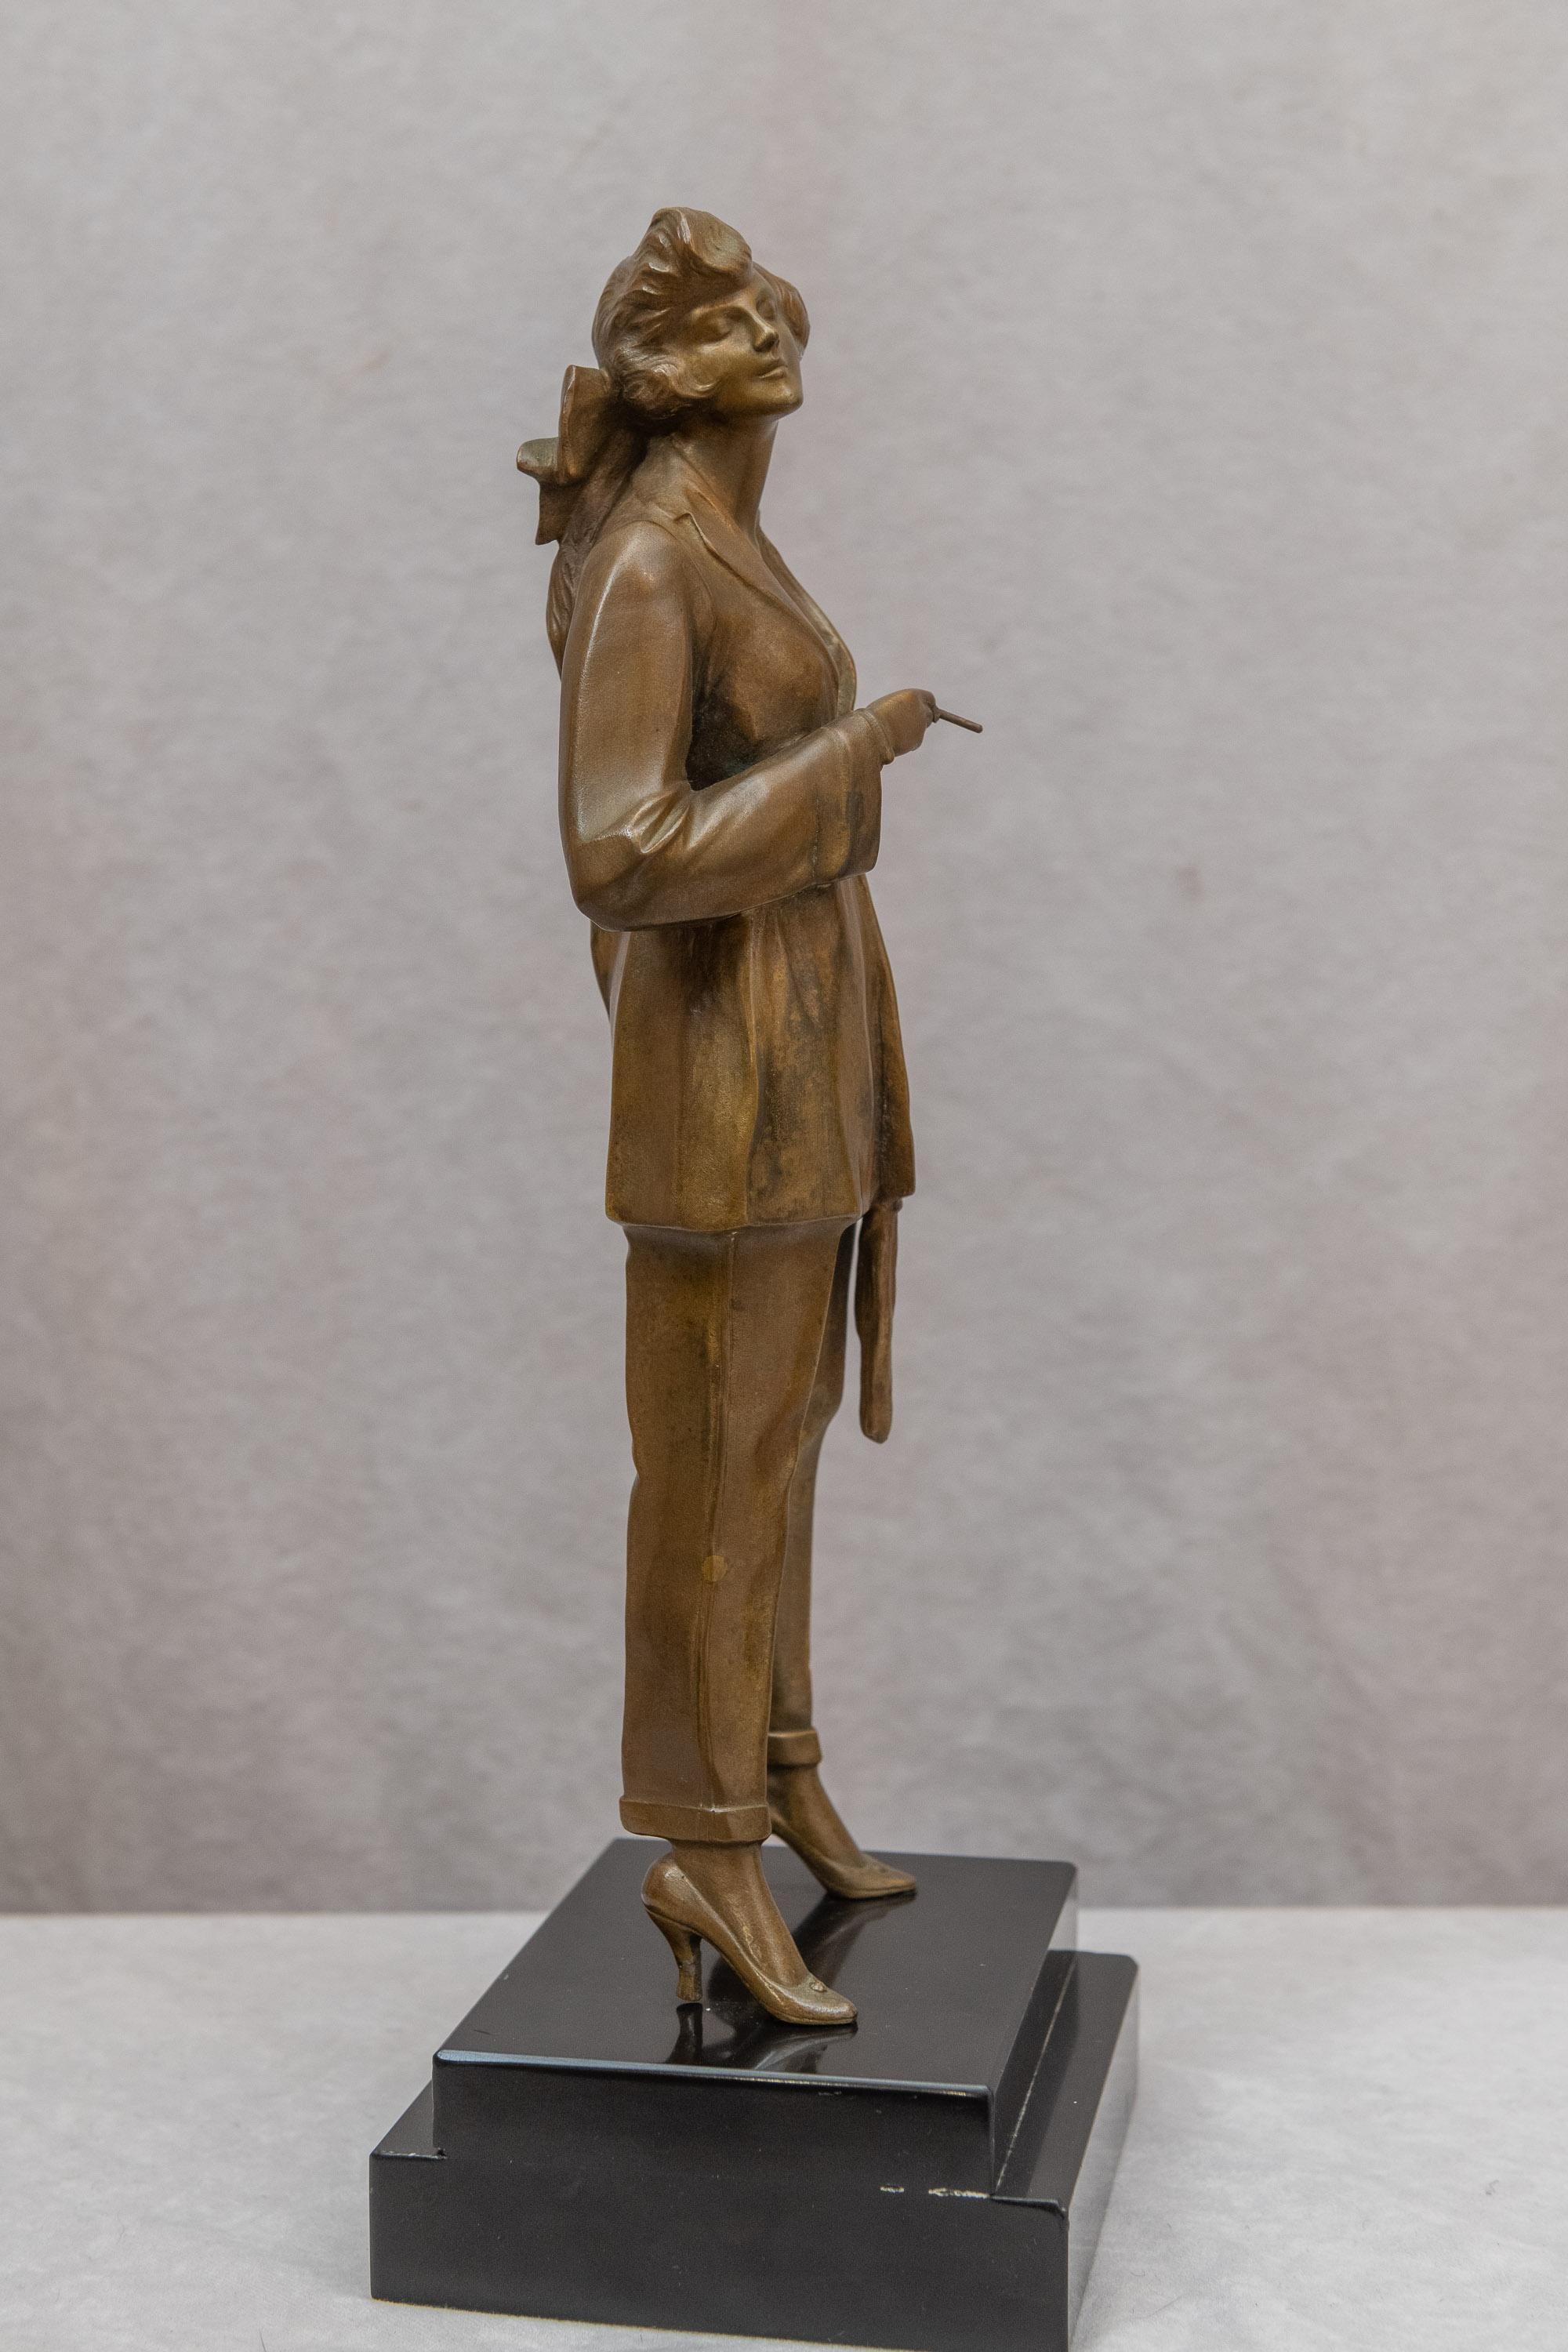 Hand-Crafted Art Deco Bronze of a Classy Woman by Bruno Zach ca. 1930s